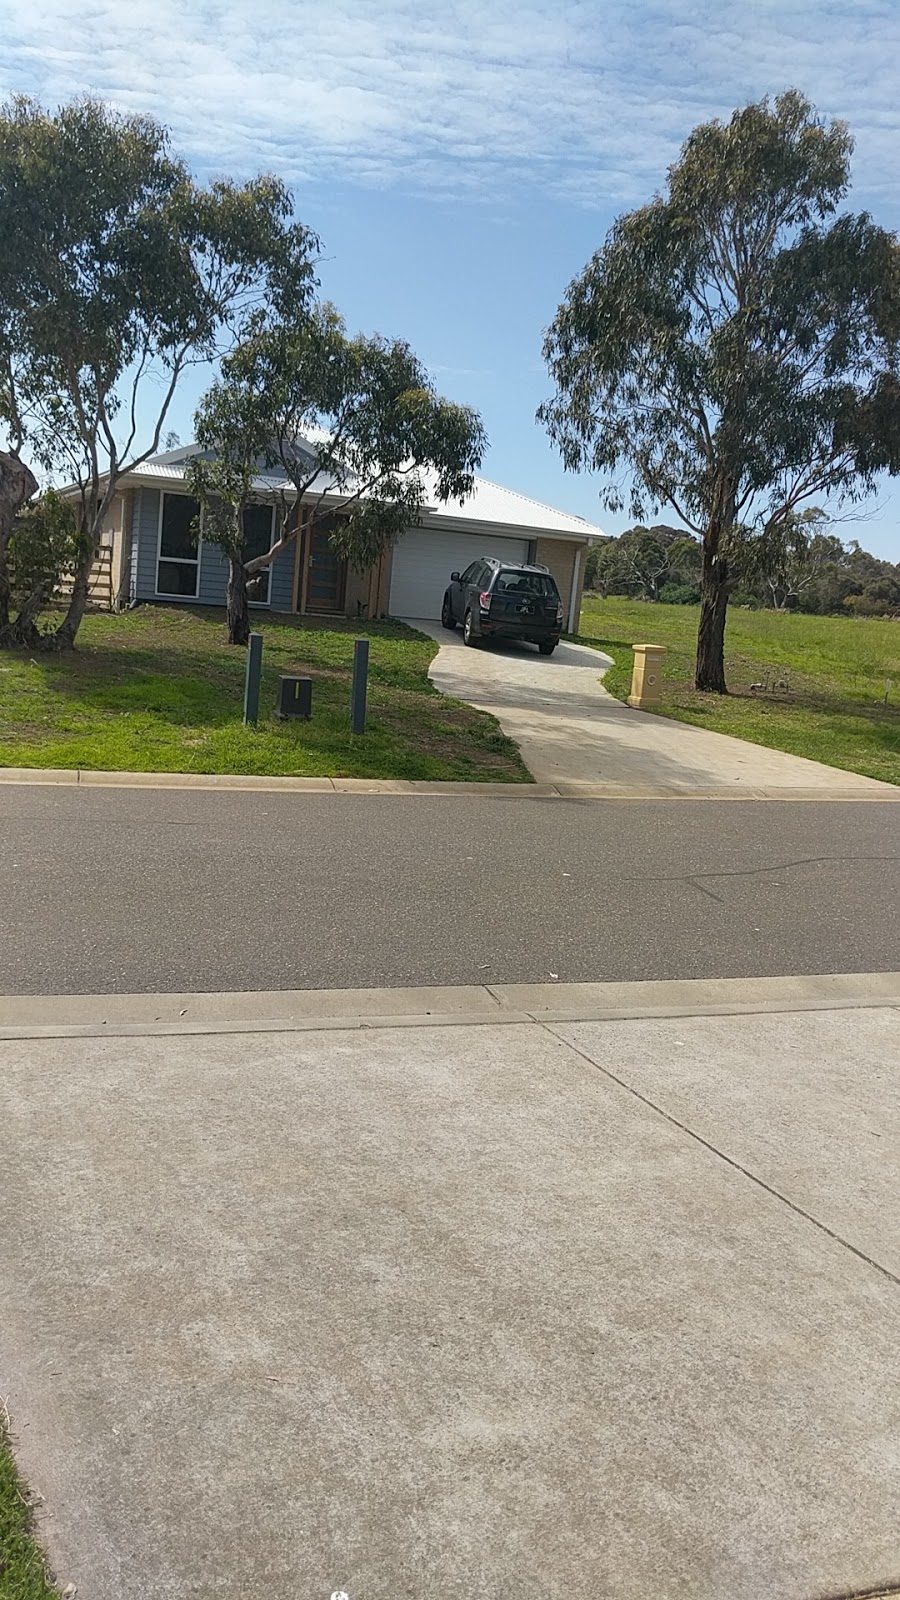 Currawong Close | lodging | 16 Currawong Cl, Cowes VIC 3922, Australia | 0411642857 OR +61 411 642 857